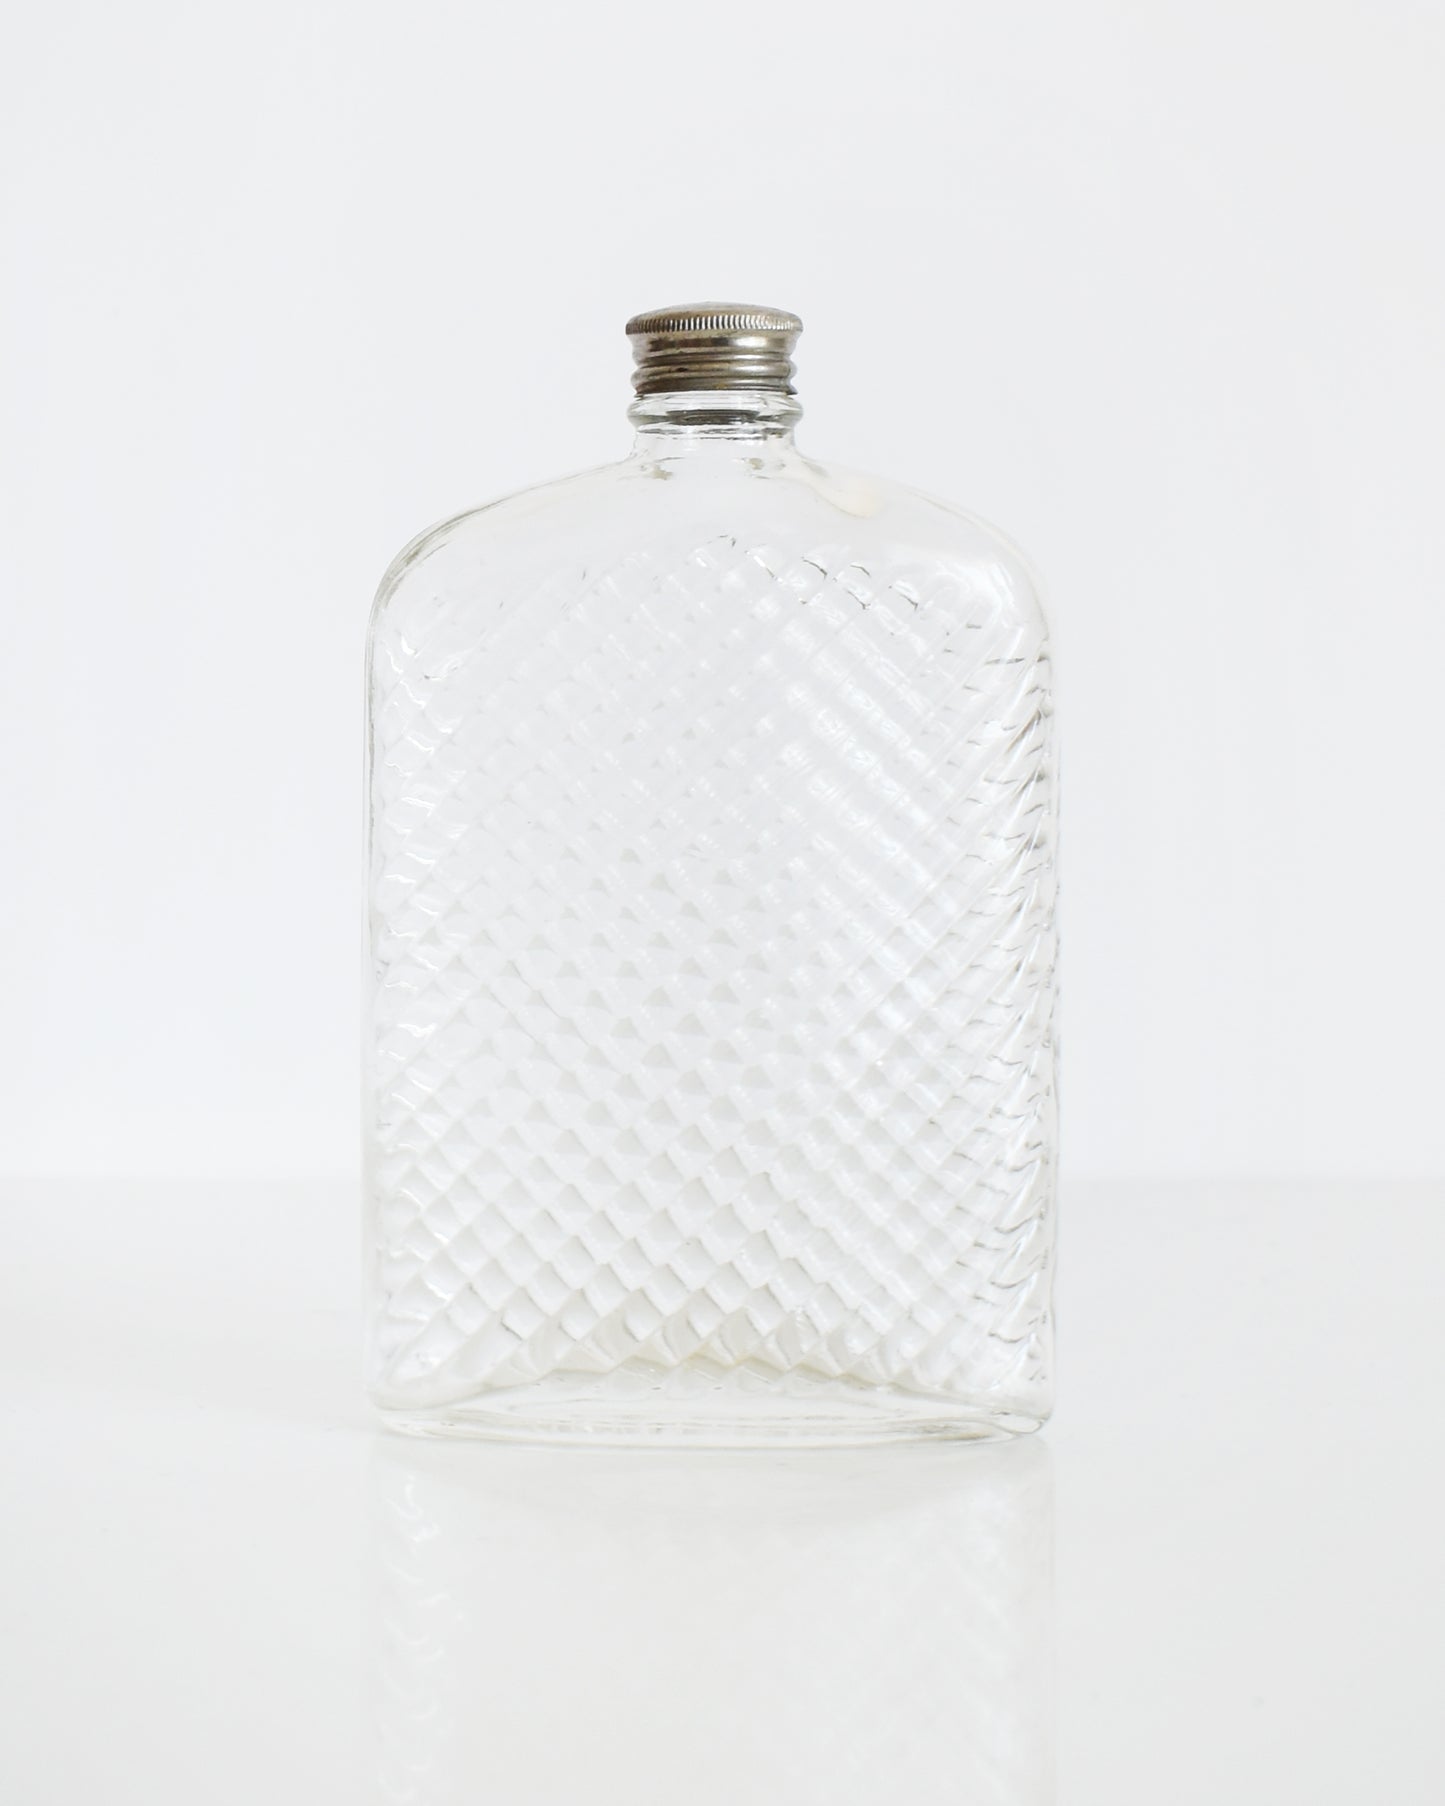 A vintage glass flask that has a cut diamond pattern and a silver screw top. The flask is on a white table and a white background.